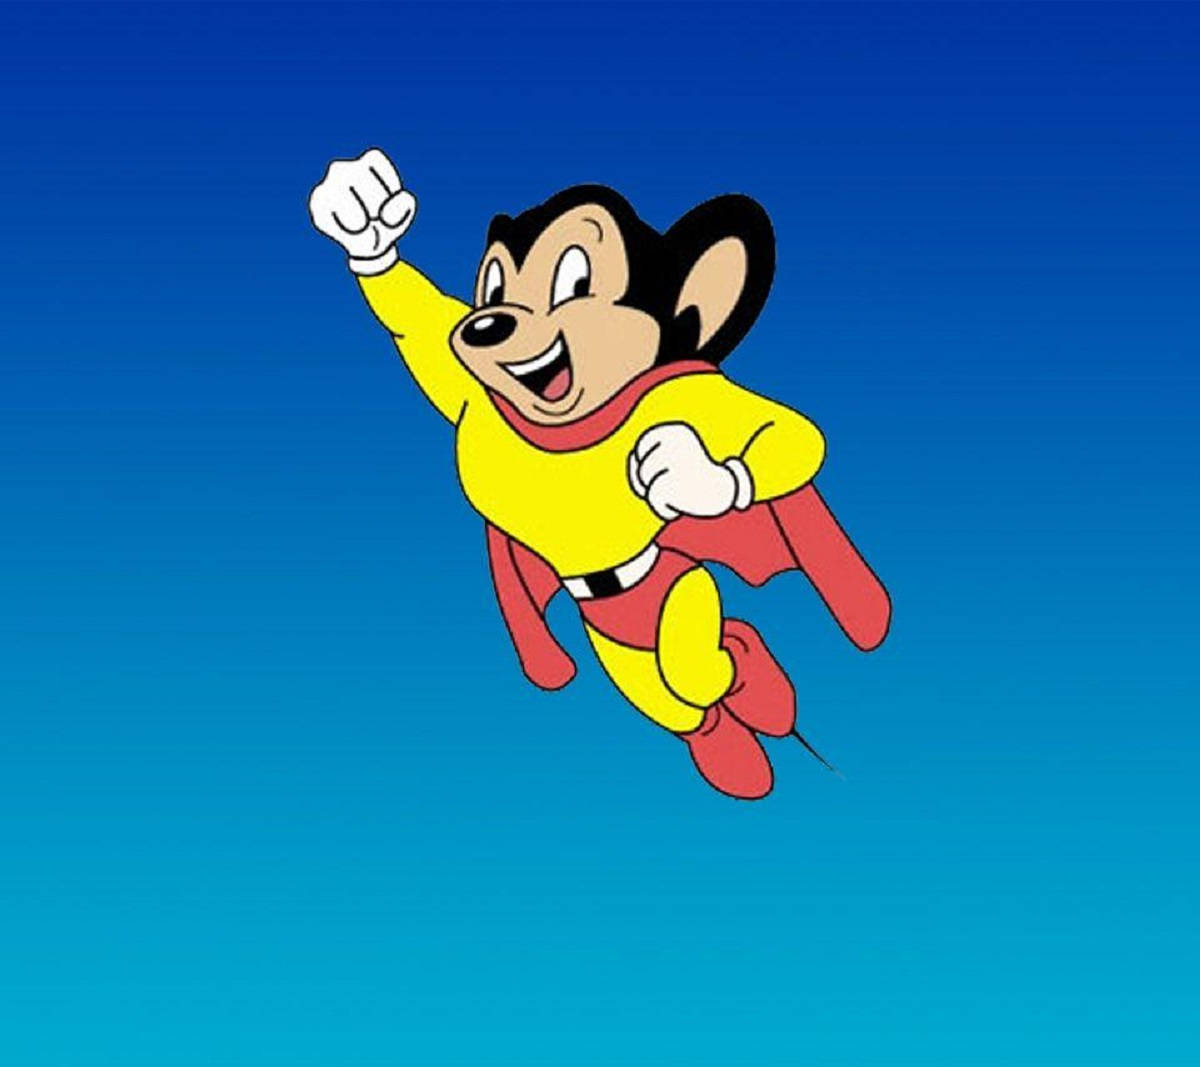 Classic Mighty Mouse Cartoon Pose Wallpaper